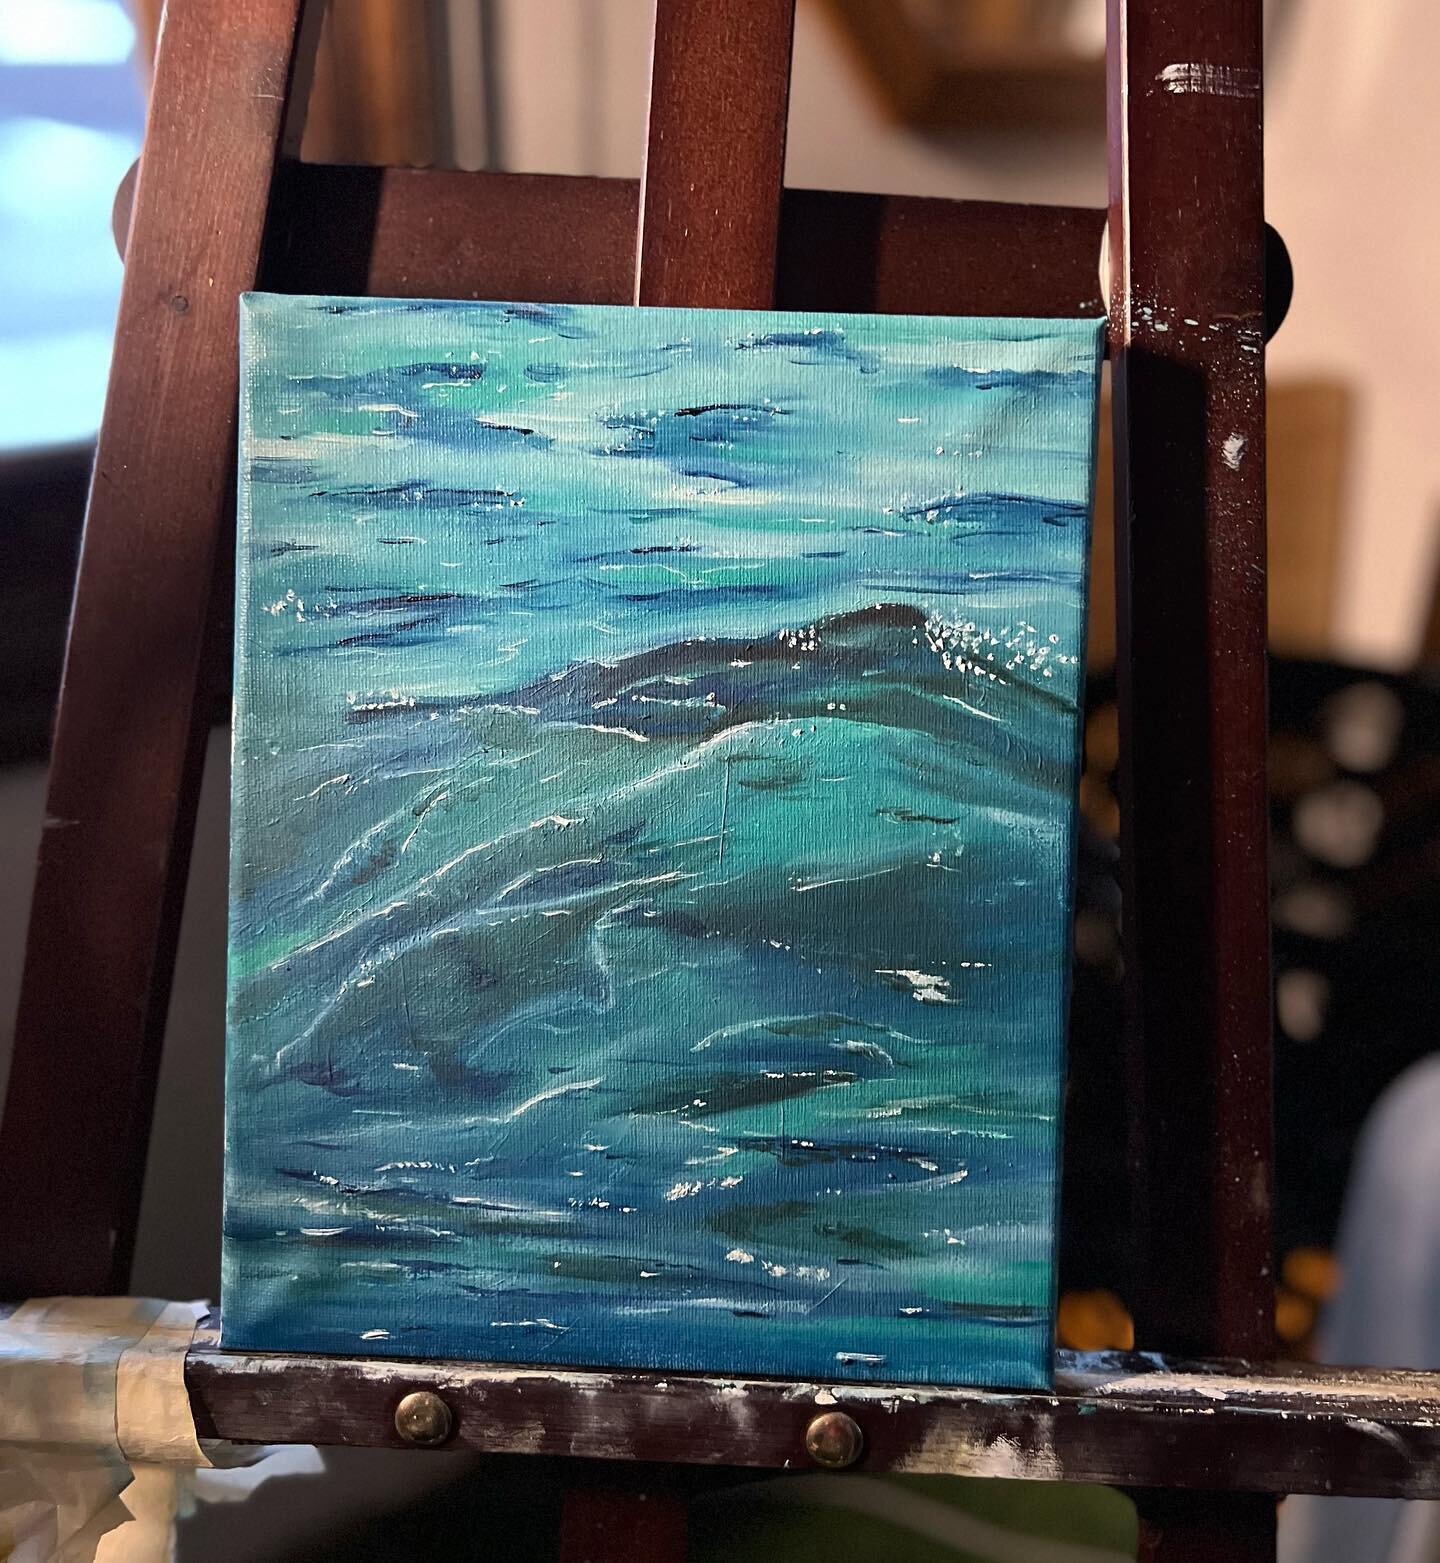 Usually I paint with acrylics, but I took it a step further and decided to try oils. It&rsquo;s a lot different and I have much to learn but I enjoy every second of painting. 

#oilpainting #paintings #artistsoninstagram